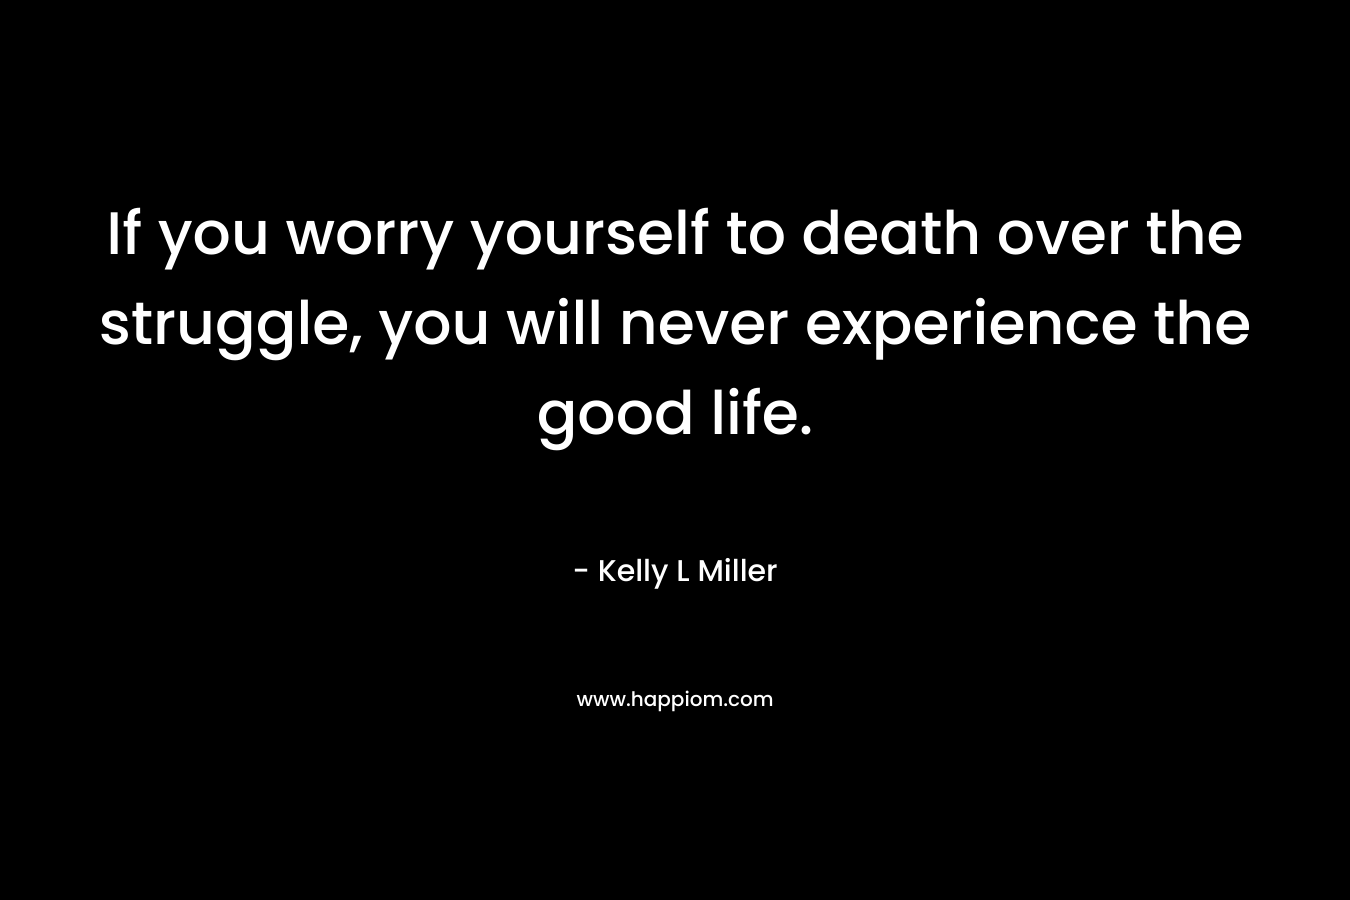 If you worry yourself to death over the struggle, you will never experience the good life.